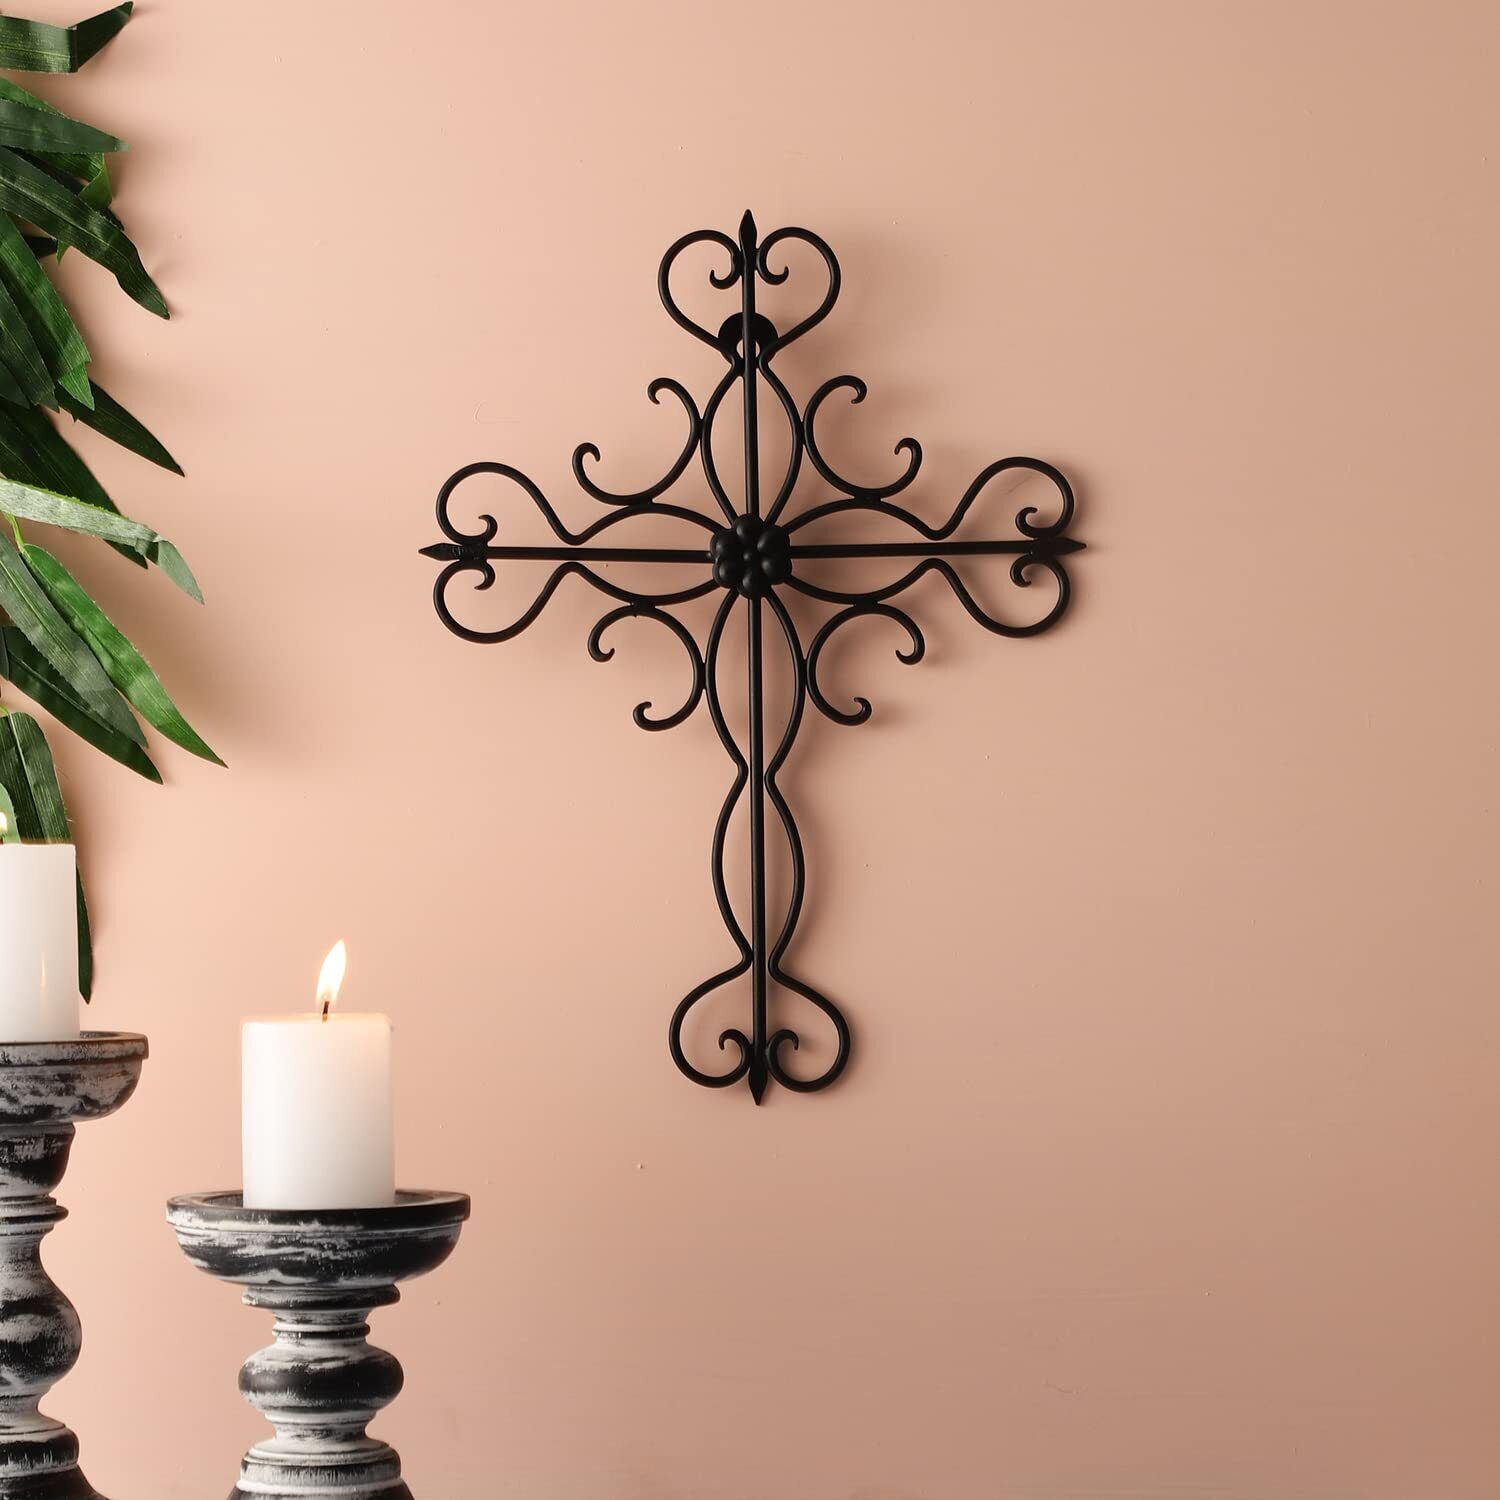 Large Decorative Hanging Wall Cross Black 14 x 10 Inches - Decorative Metal W...